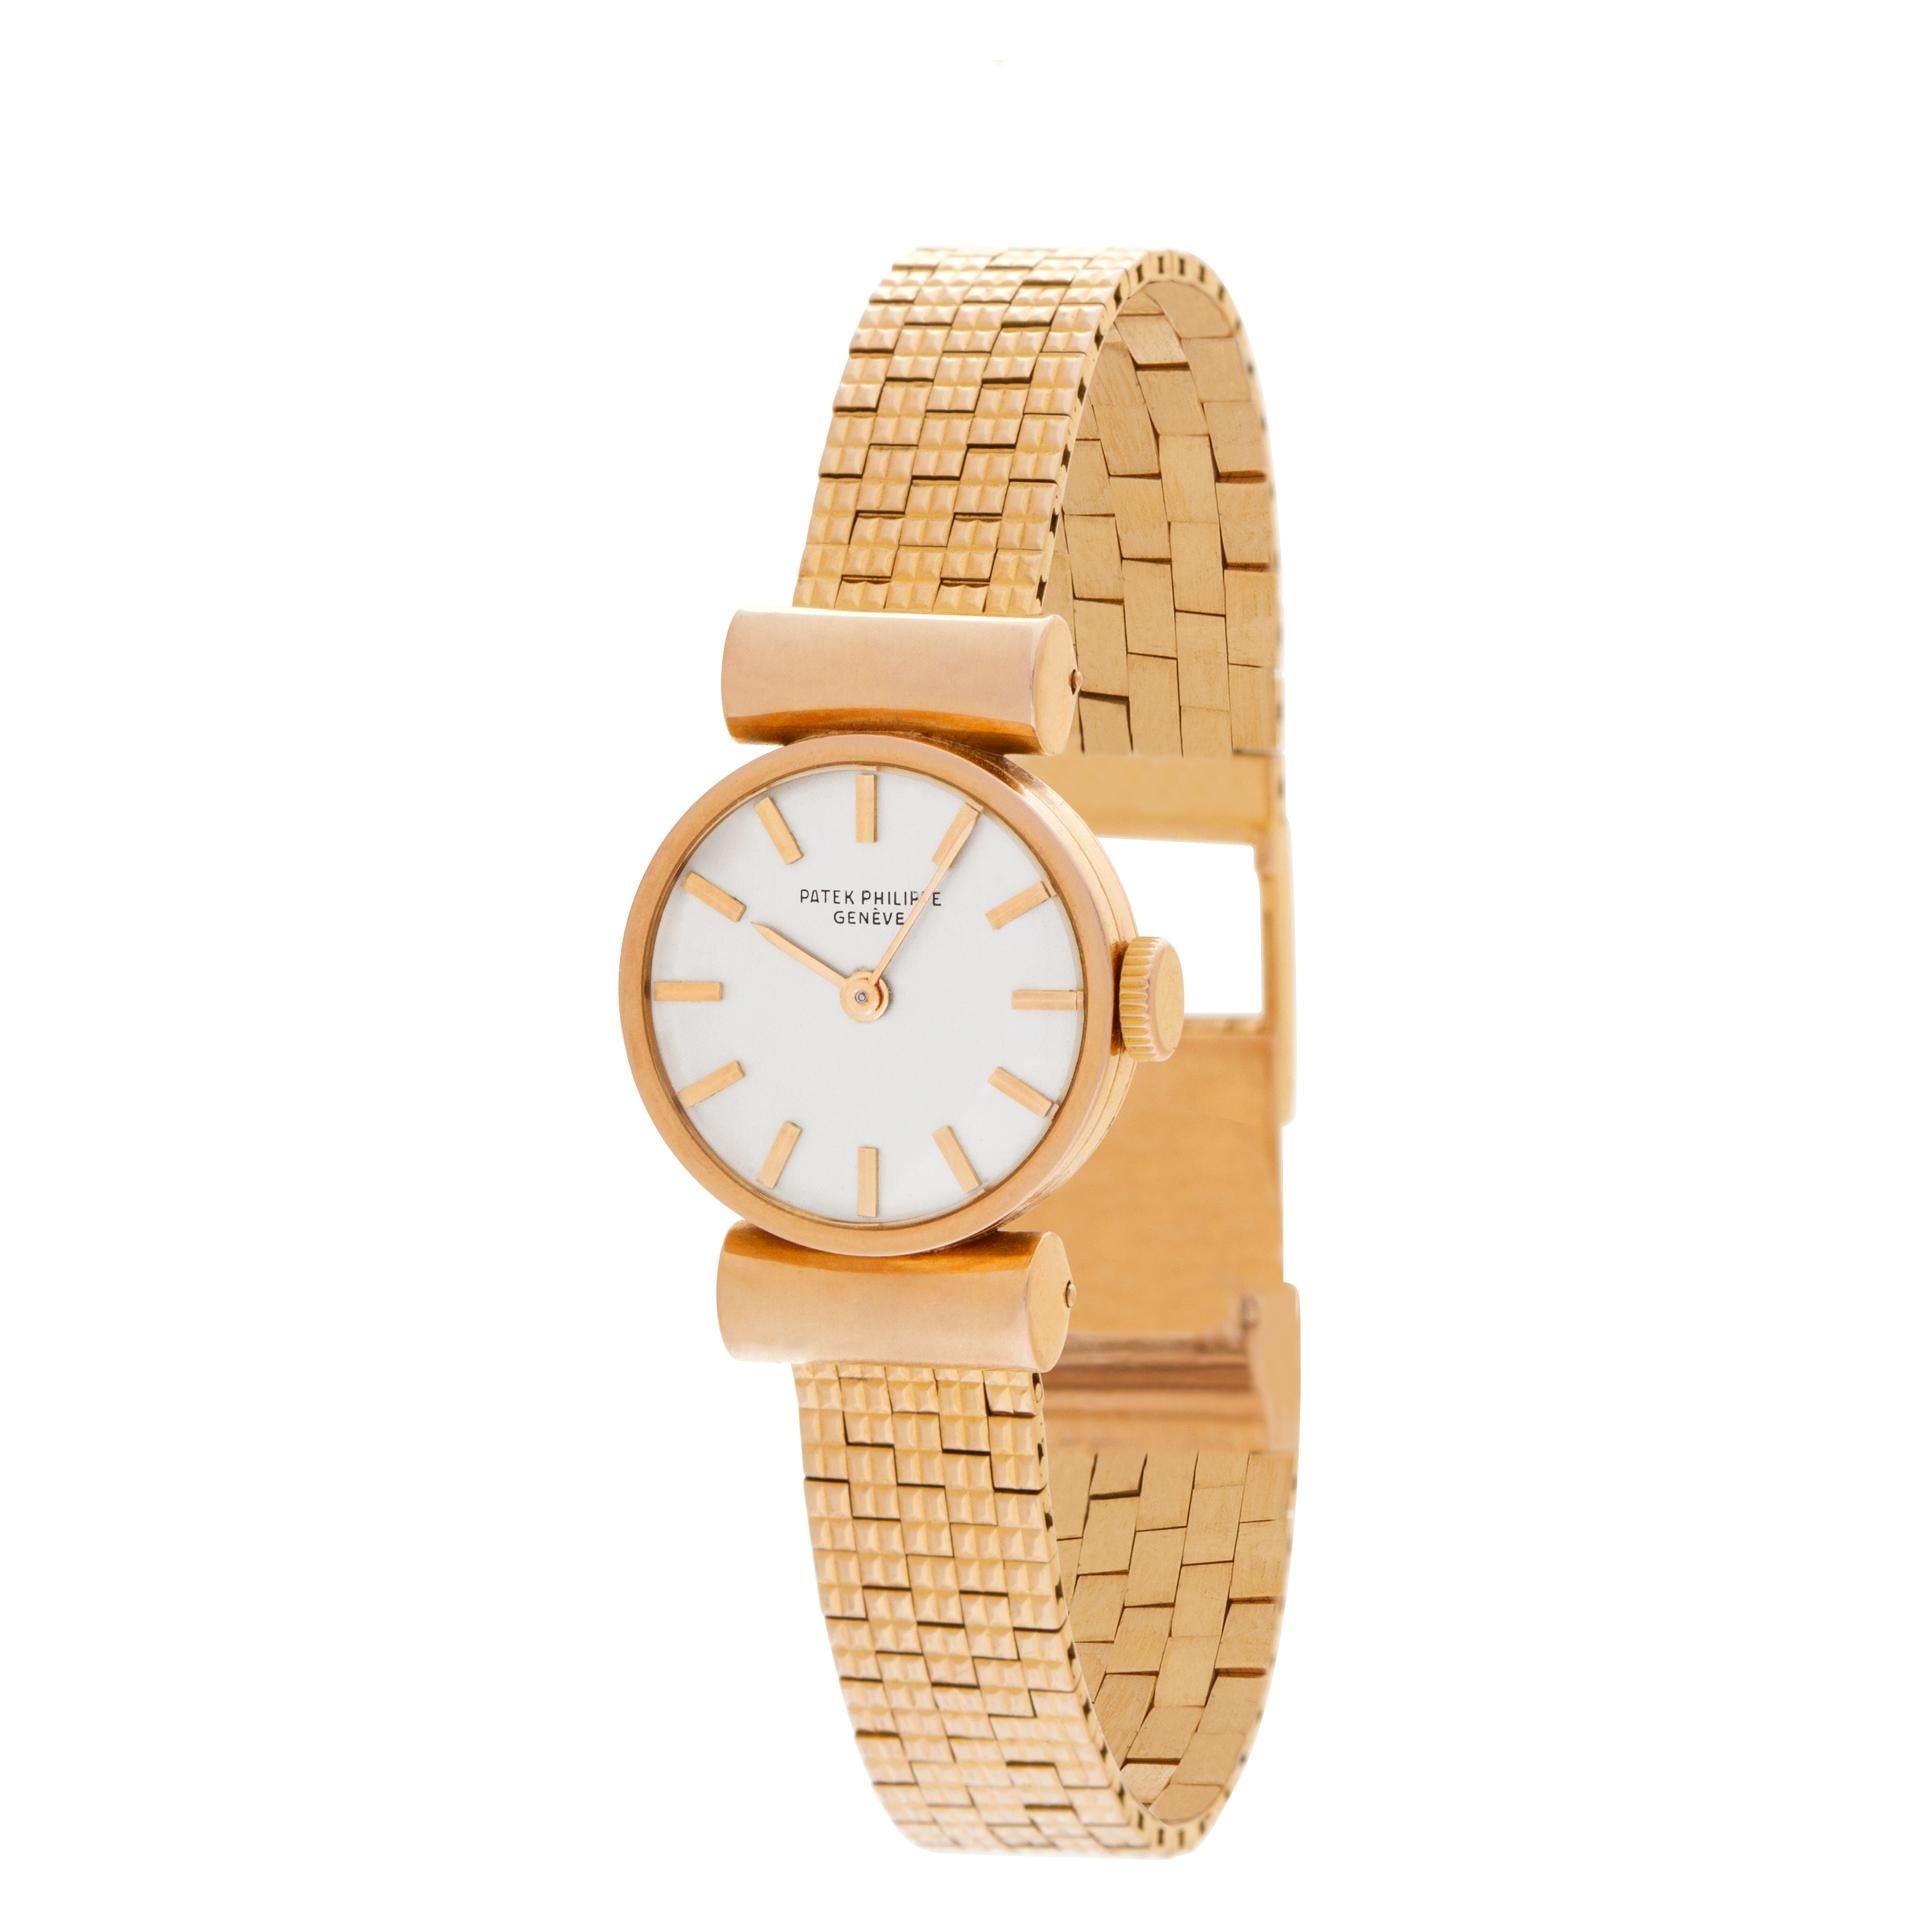 Vintage ladies Patek Philippe in 18k rose gold. Manual. 20 mm case size. With box and papers. Ref 317. Circa 1950s. Fine Pre-owned Patek Philippe Watch. Certified preowned Dress Patek Philippe Vintage 317 watch on a 18k rose gold bracelet with a 18k